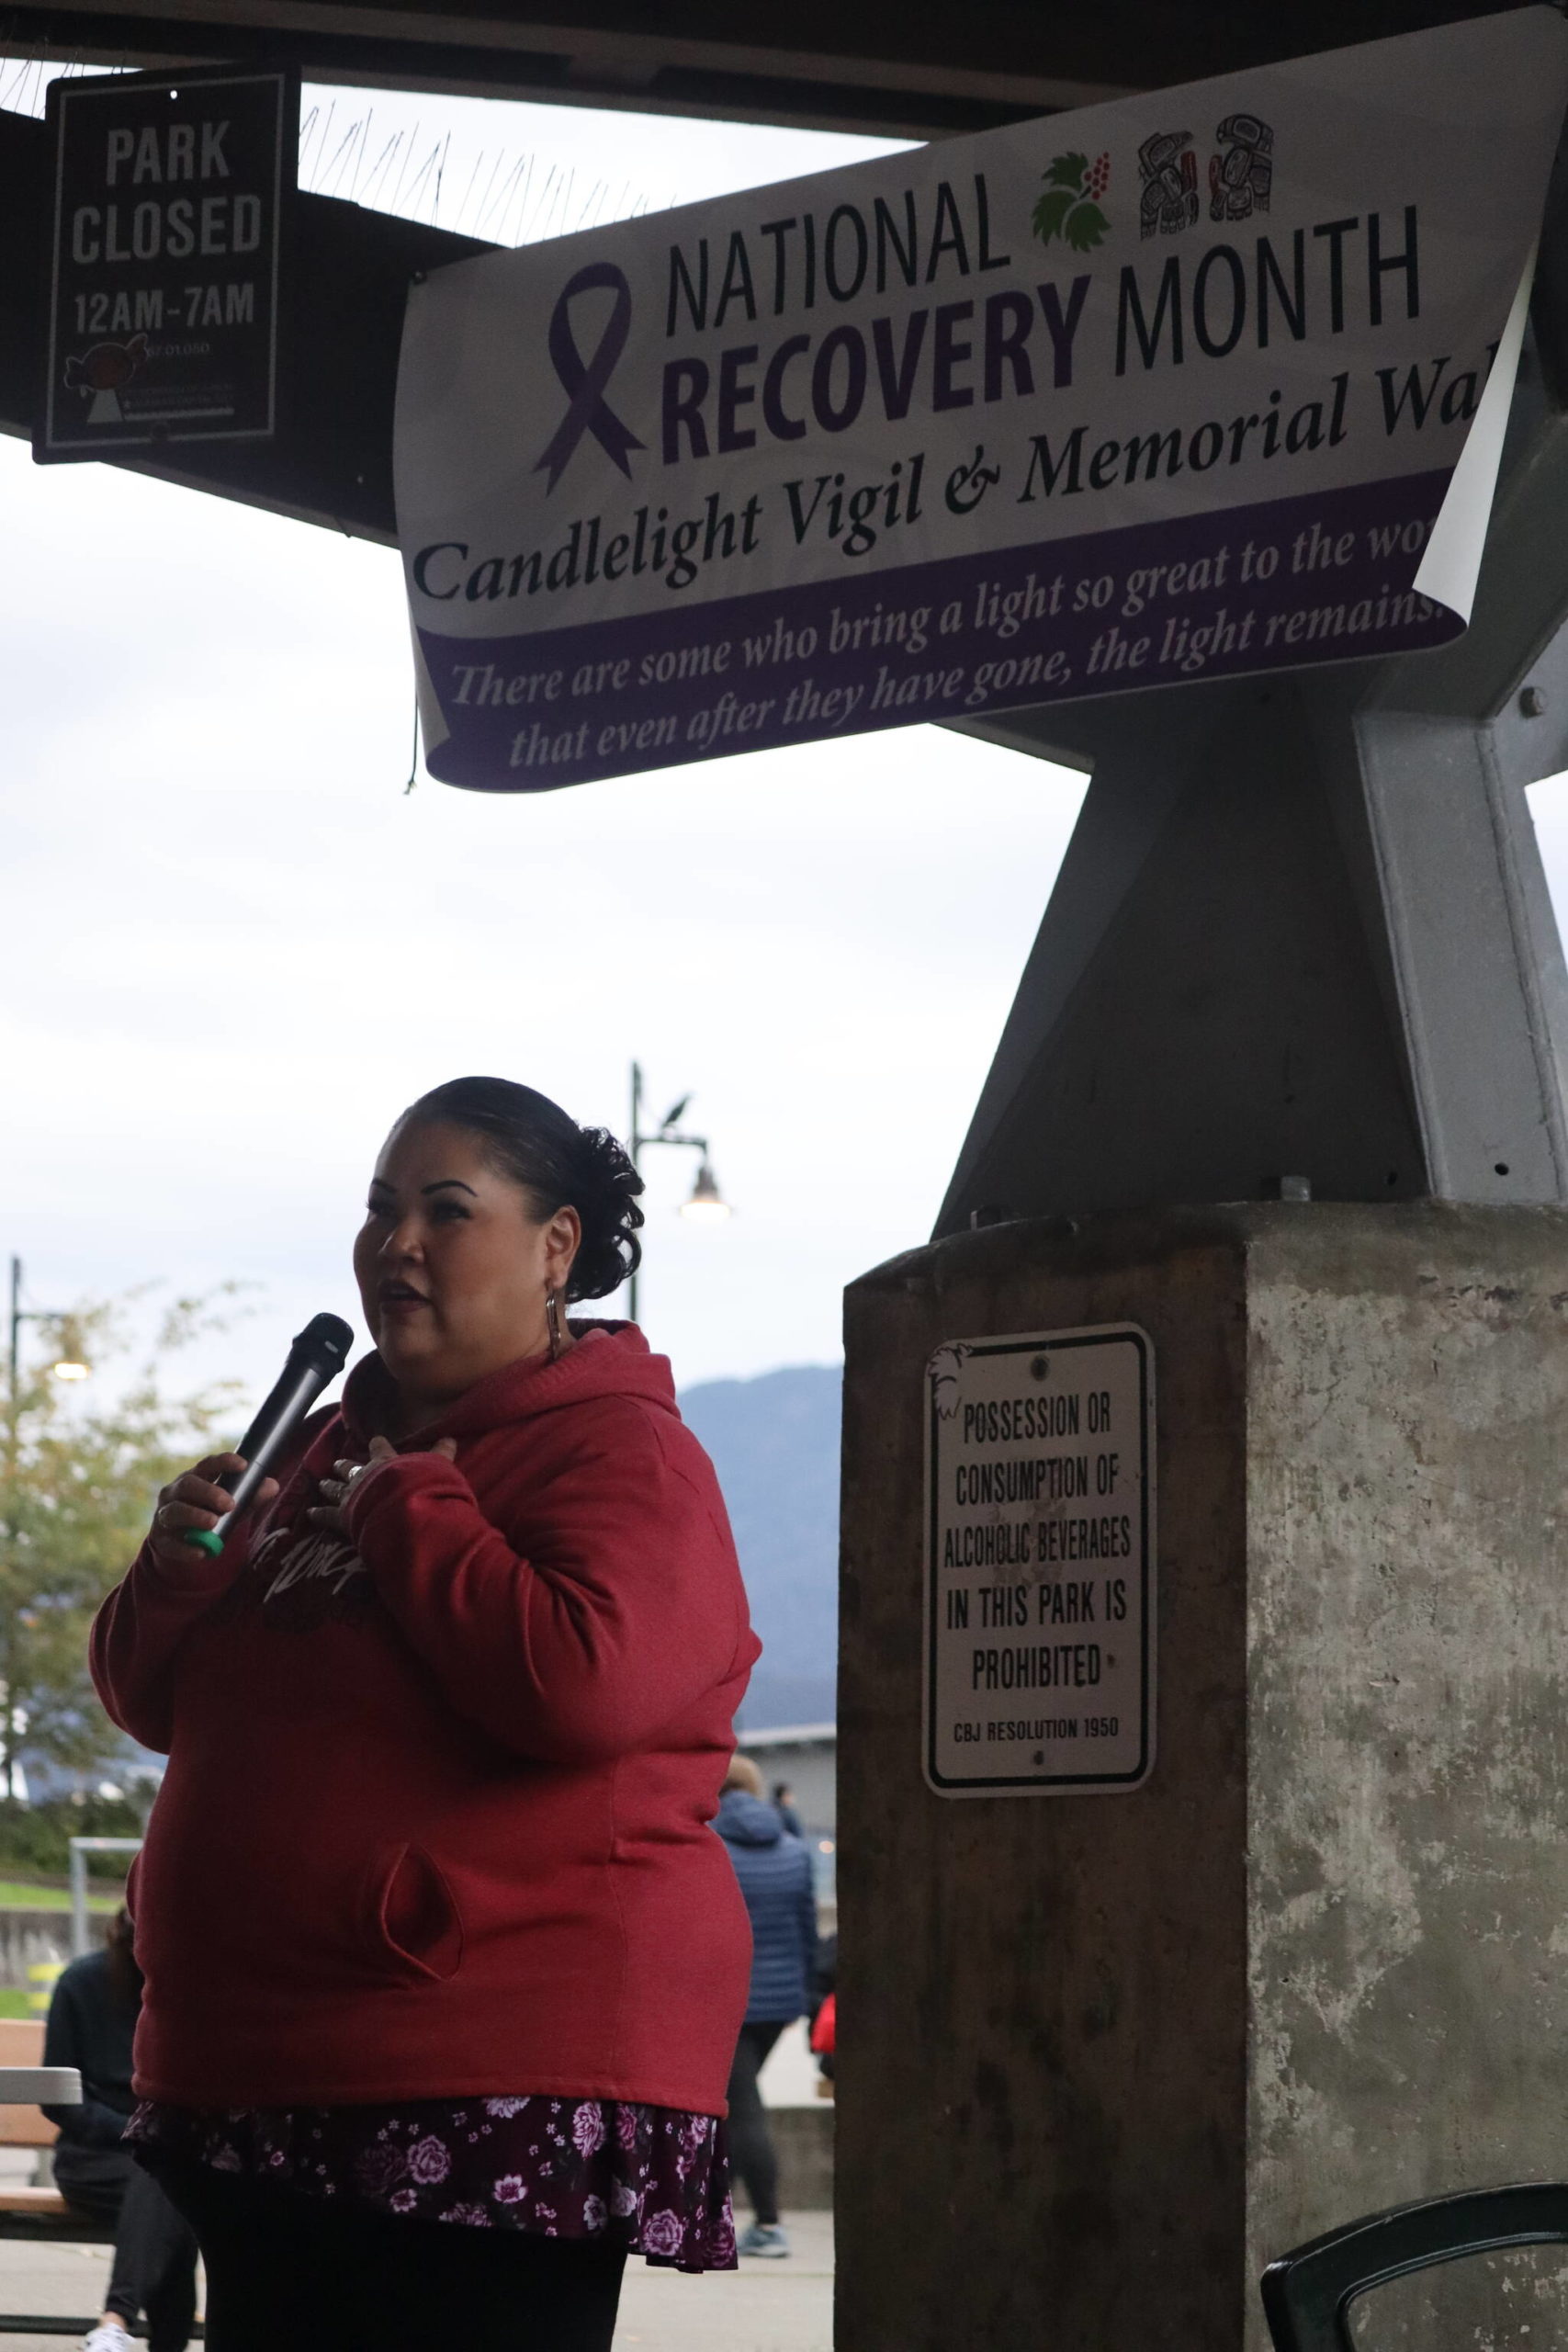 Jeni Brown with the Community Behavioral Services helped organize Saturday’s candlelight vigil as well as spoke at the ceremony and shared her personal story of recovery. Brown said she celebrates over five years sober. (Jonson Kuhn / Juneau Empire)